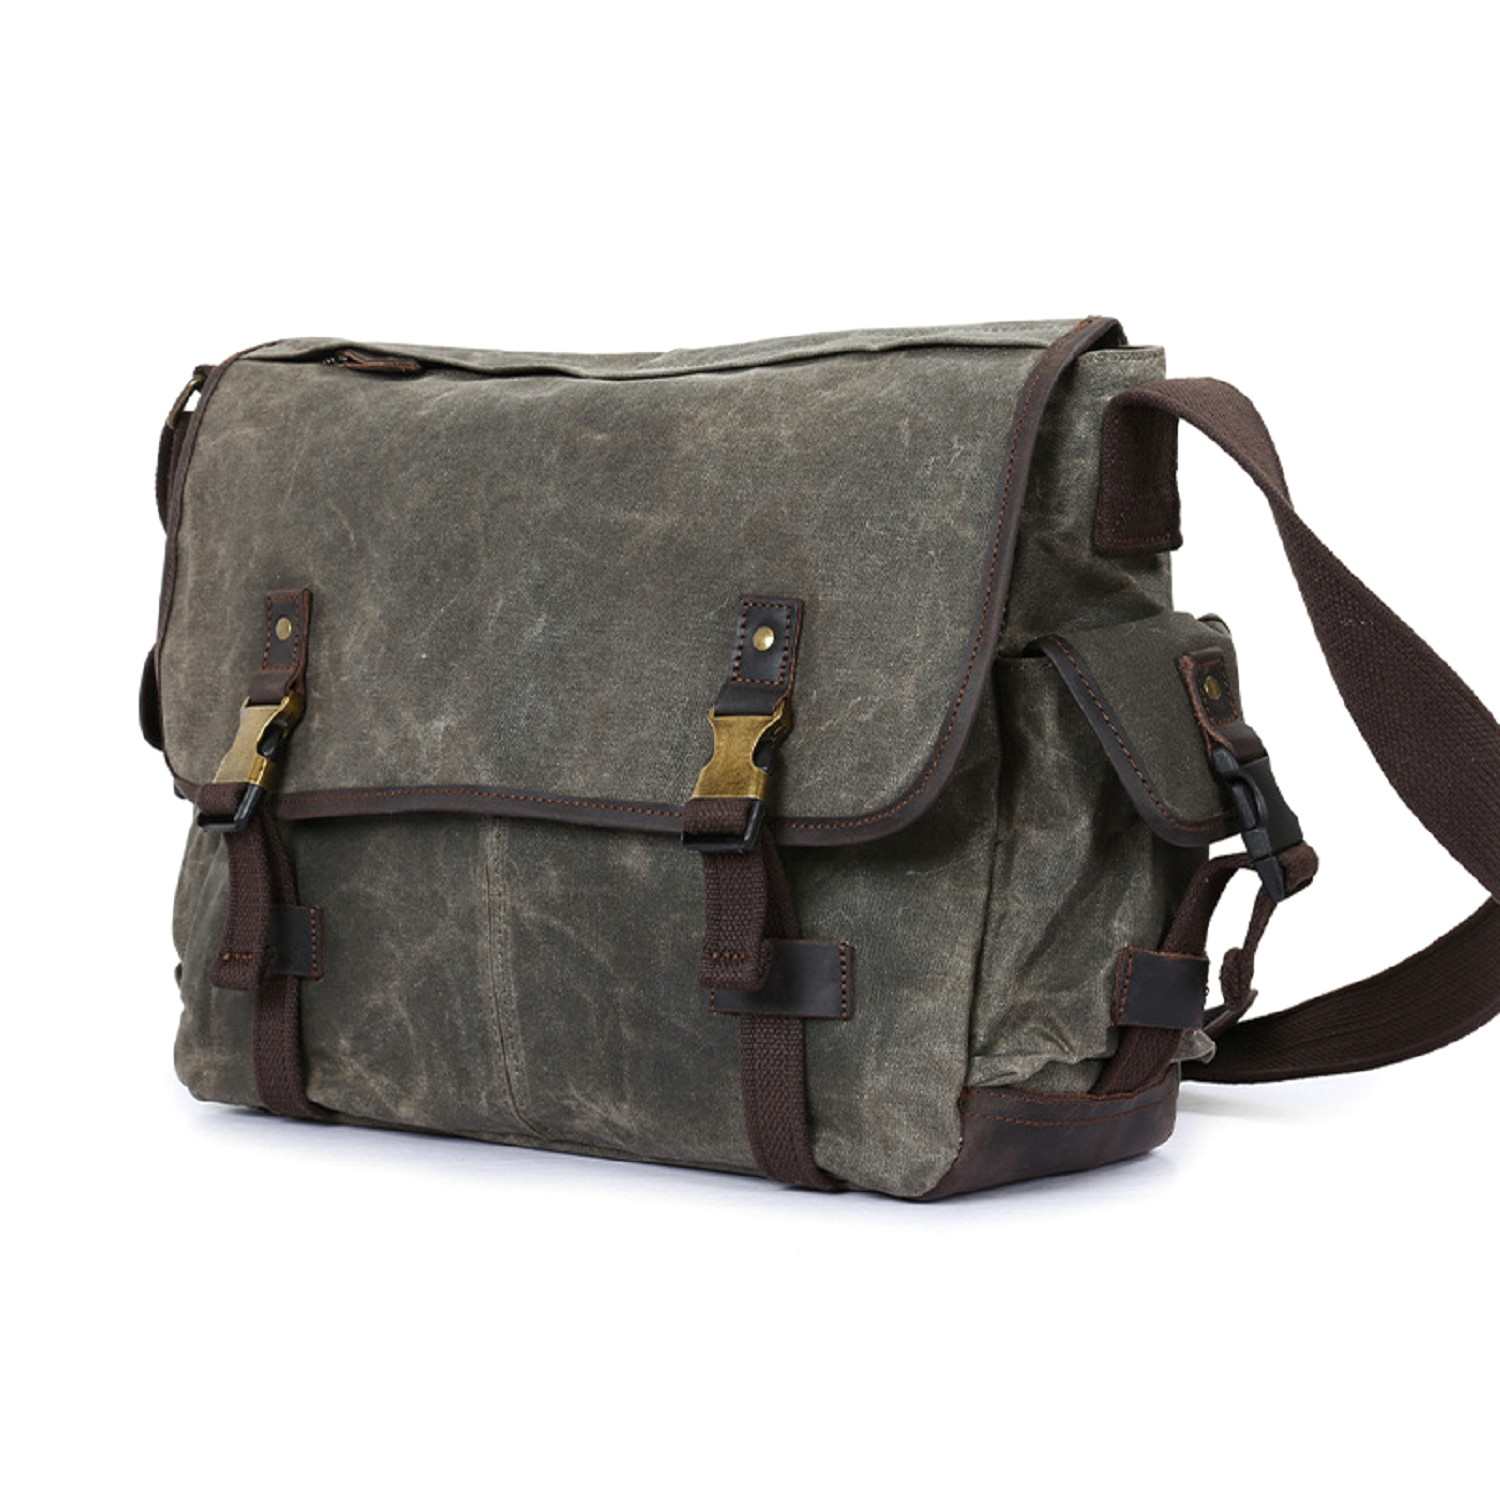 Double Buckle Messenger Bag // Green - OwnBag - Touch of Modern